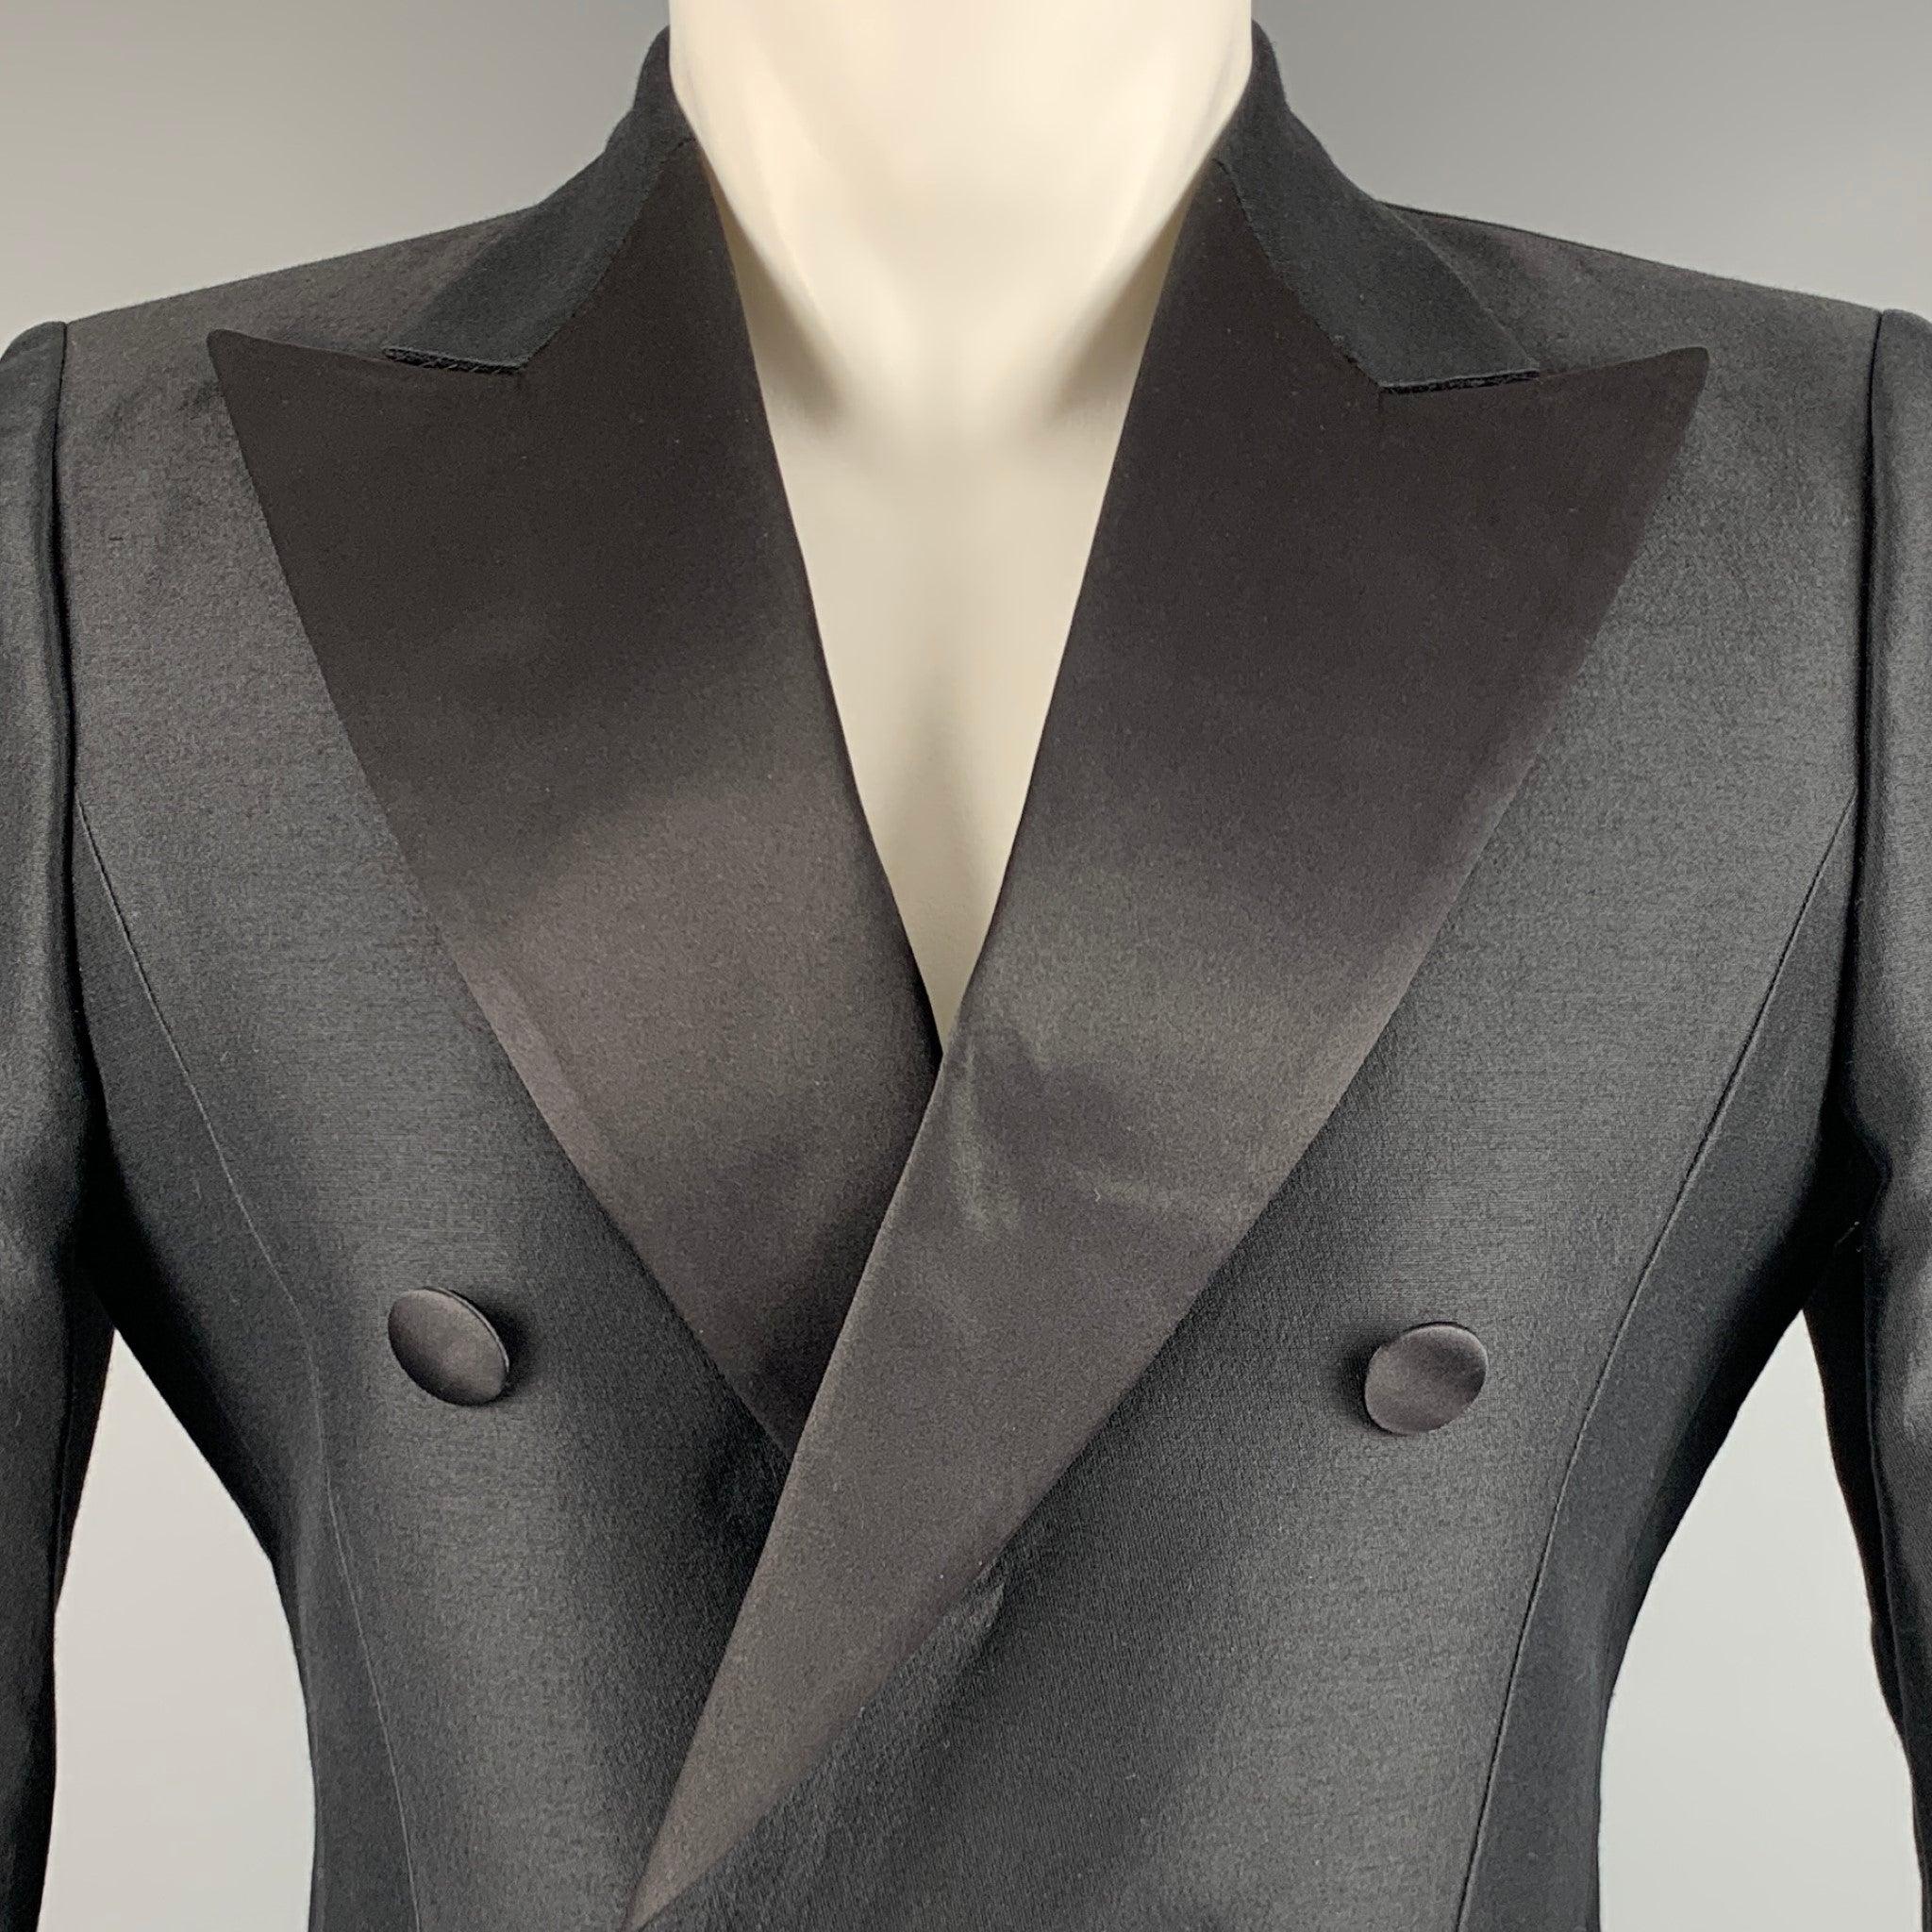 DSQUARED2 tuxedo sport coat in a black wool silk blend fabric featuring a double breasted style, peak lapel, double vented back, and single button closure. Made in Italy.Very Good Pre-Owned Condition. Minor marks. 

Marked:   IT 48 

Measurements: 
